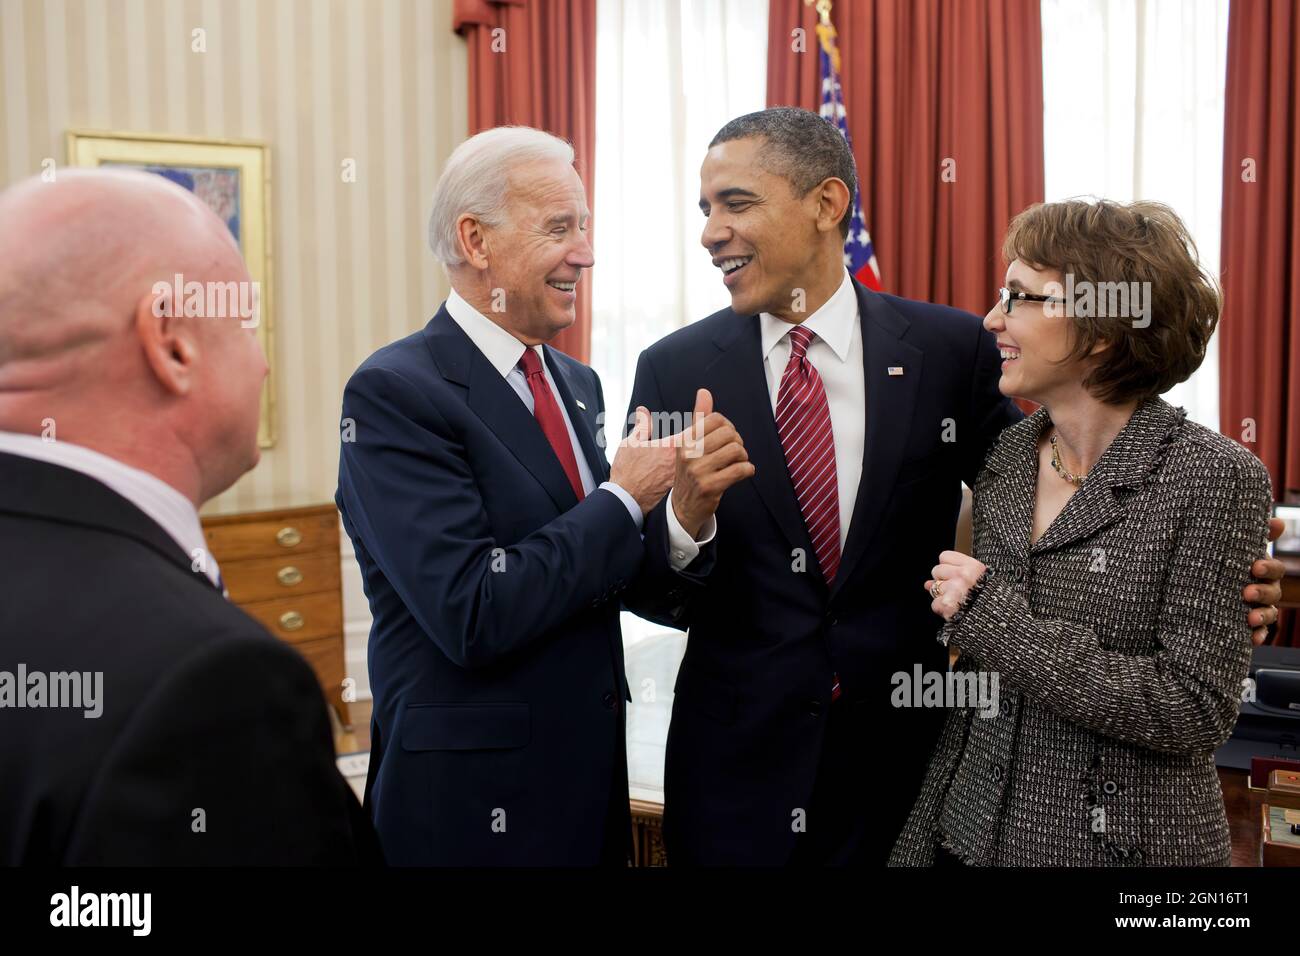 President Barack Obama and Vice President Joe Biden talk with former Representative Gabrielle Giffords and her husband, Mark Kelly, after the President signed H.R. 3801, the Ultralight Aircraft Smuggling Prevention Act of 2012, in the Oval Office, Feb. 10, 2012. The bill was the last piece of legislation that Giffords sponsored and voted on in the U.S. House of Representatives. (Official White House Photo by Pete Souza) This official White House photograph is being made available only for publication by news organizations and/or for personal use printing by the subject(s) of the photograph. Th Stock Photo